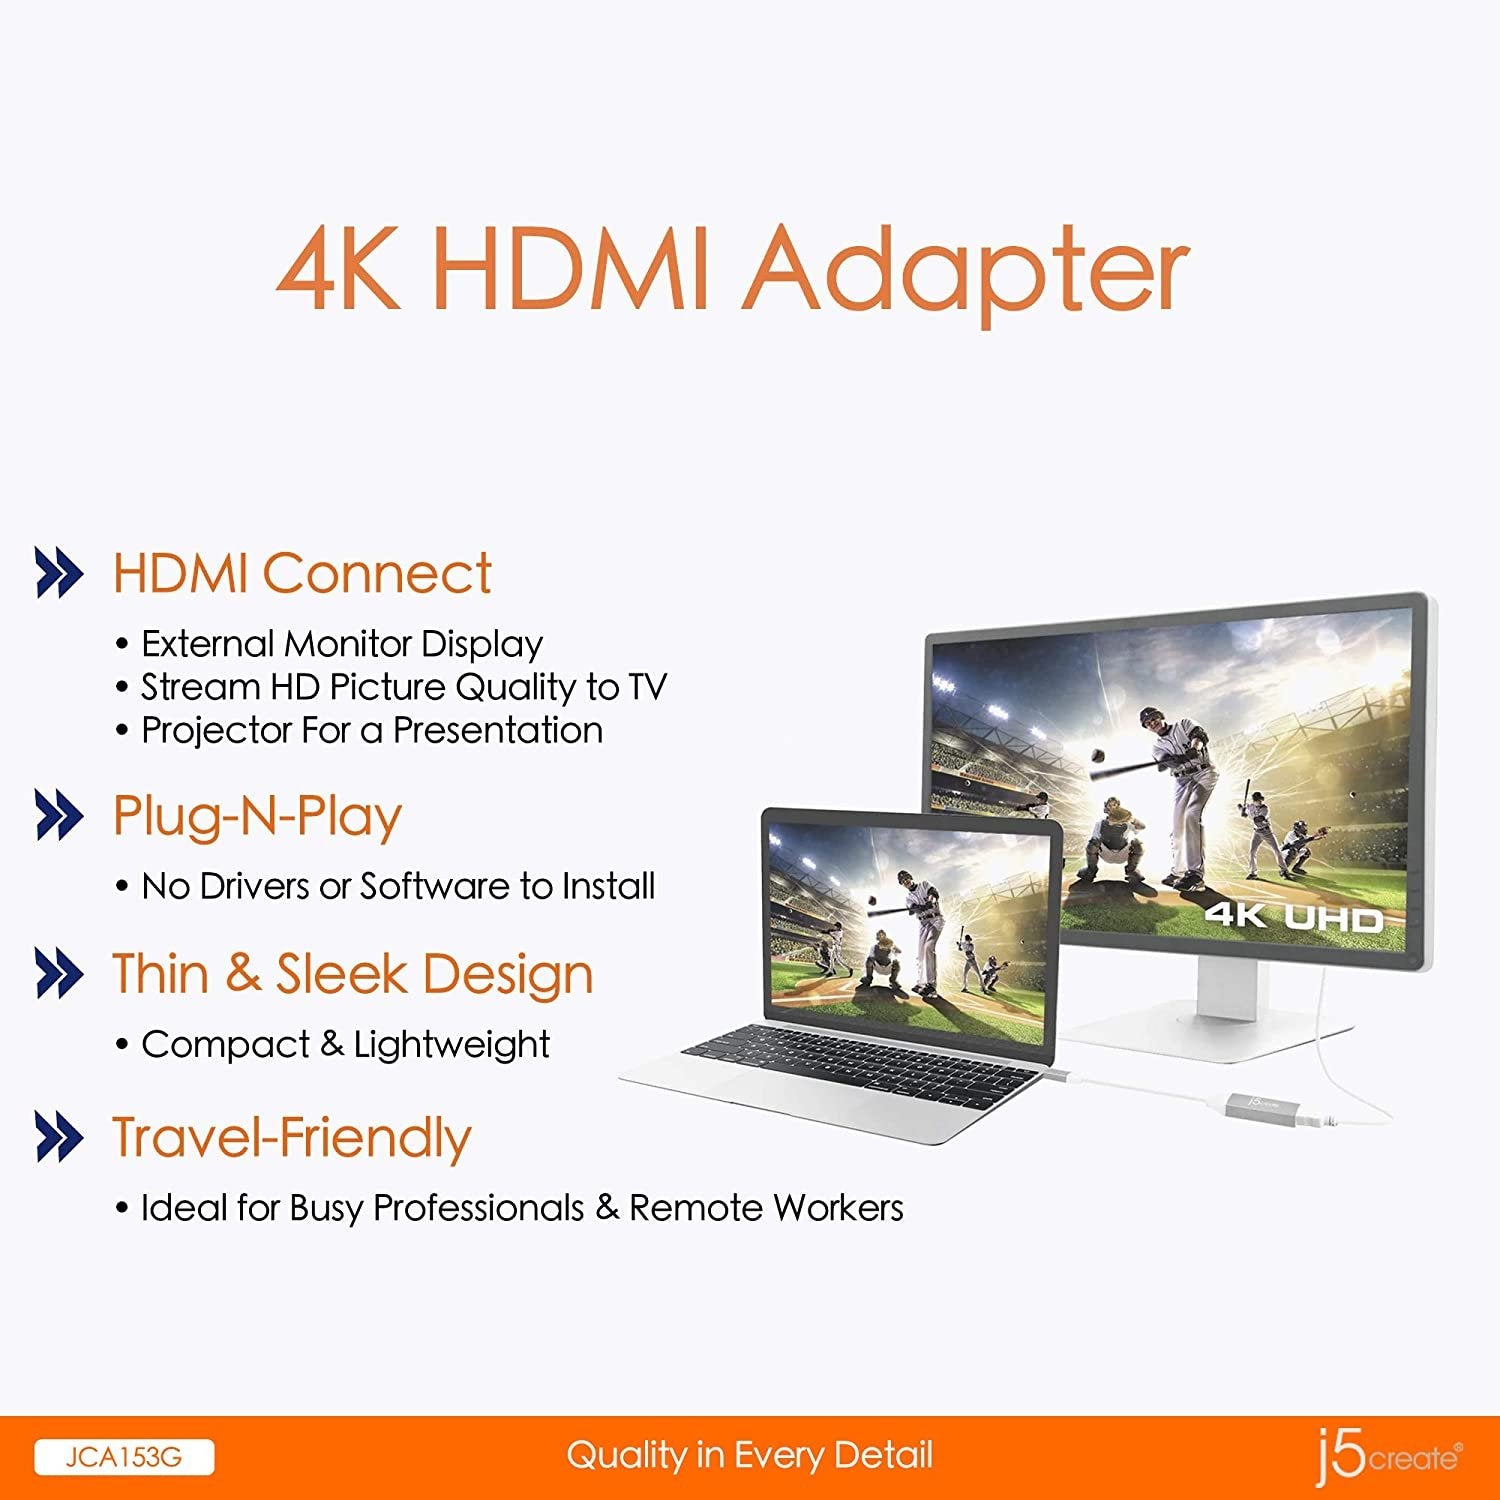 j5create USB Type-C to 4K HDMI Adapter 3840 x 2160 @ 60Hz | HDMI 1.4 4K @ 30 Hz to 4K @ 60 Hz | Adapter Compatible with MacBook, Chromebook, Tablet or PC